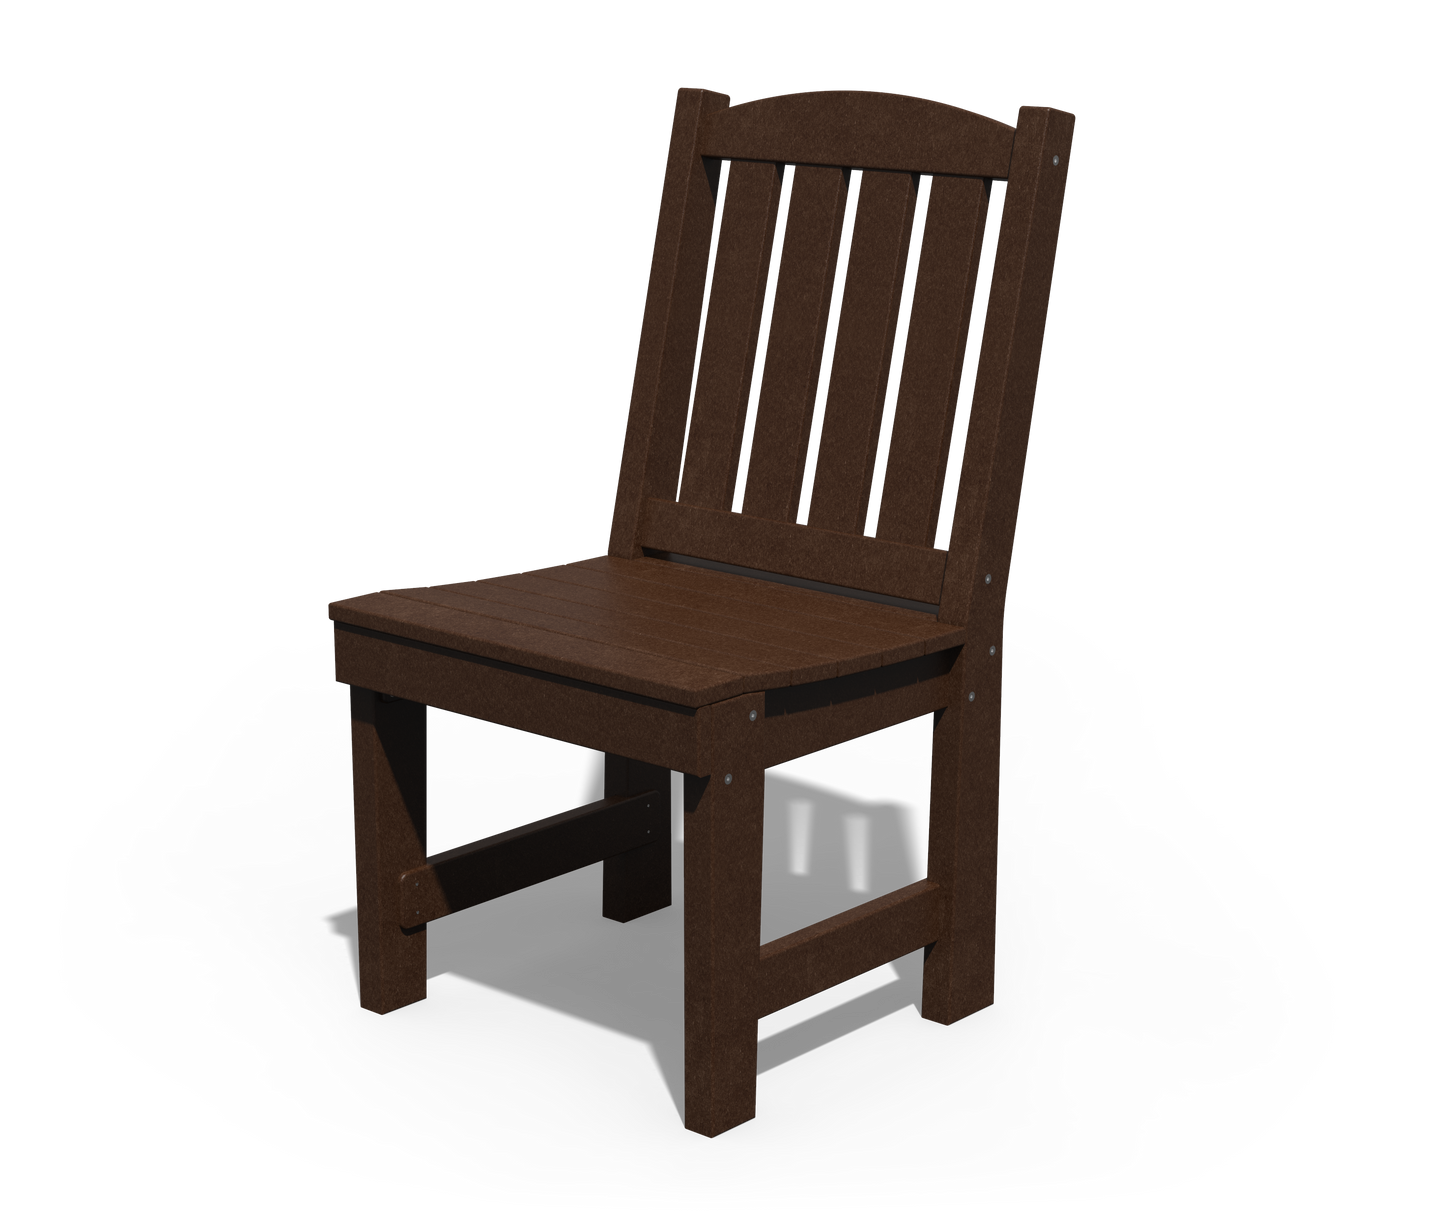 Patiova Recycled Plastic English Garden Dining Side Chair - LEAD TIME TO SHIP 3 WEEKS